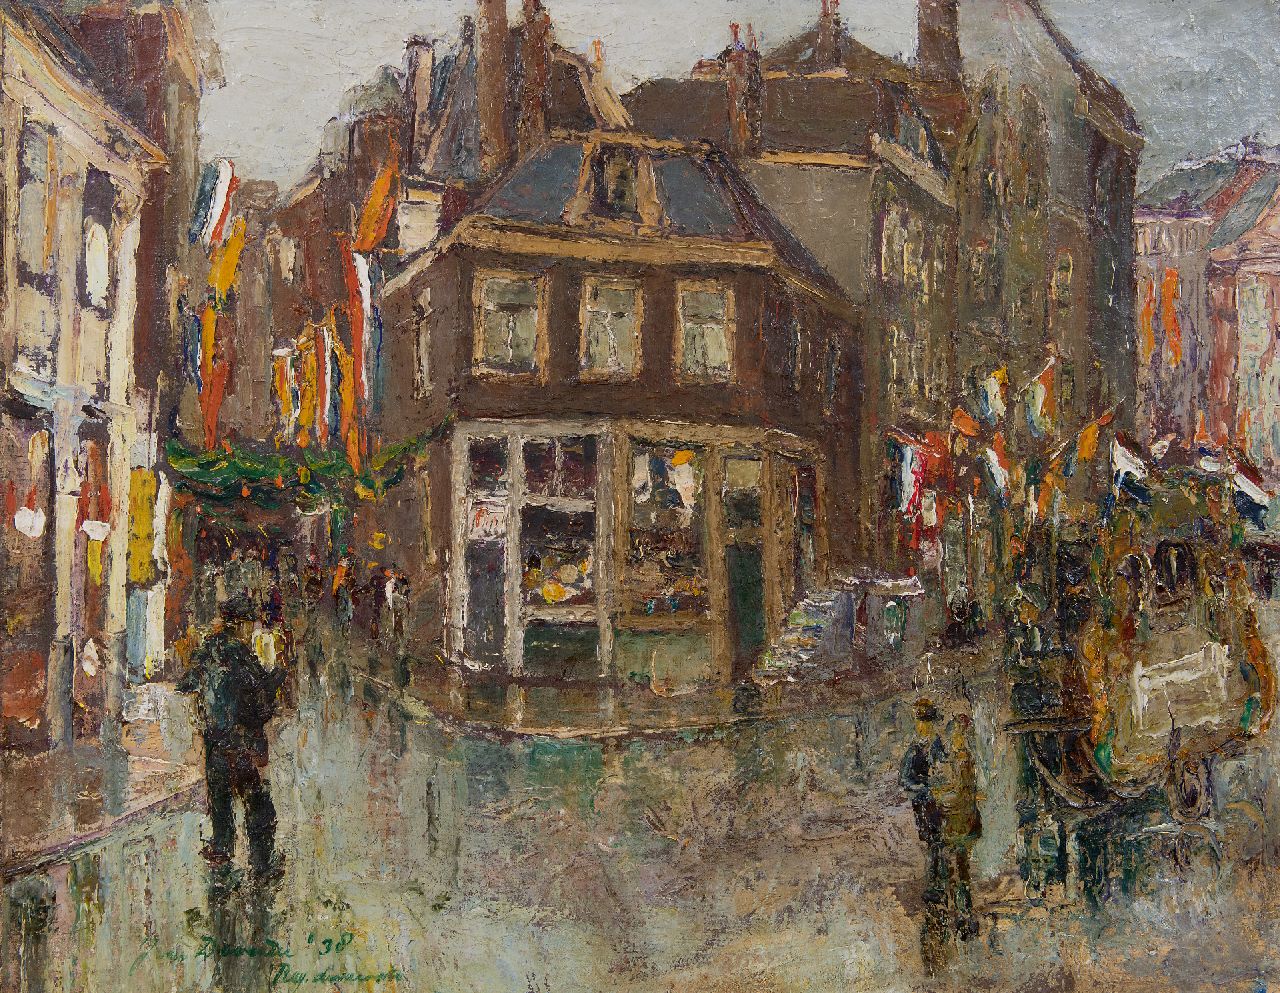 Deventer J. van | Johannes 'John' van Deventer | Paintings offered for sale | Feast in Reguliersdwarrstraat, Amsterdam, oil on canvas 55.7 x 70.3 cm, signed l.l. and dated '38